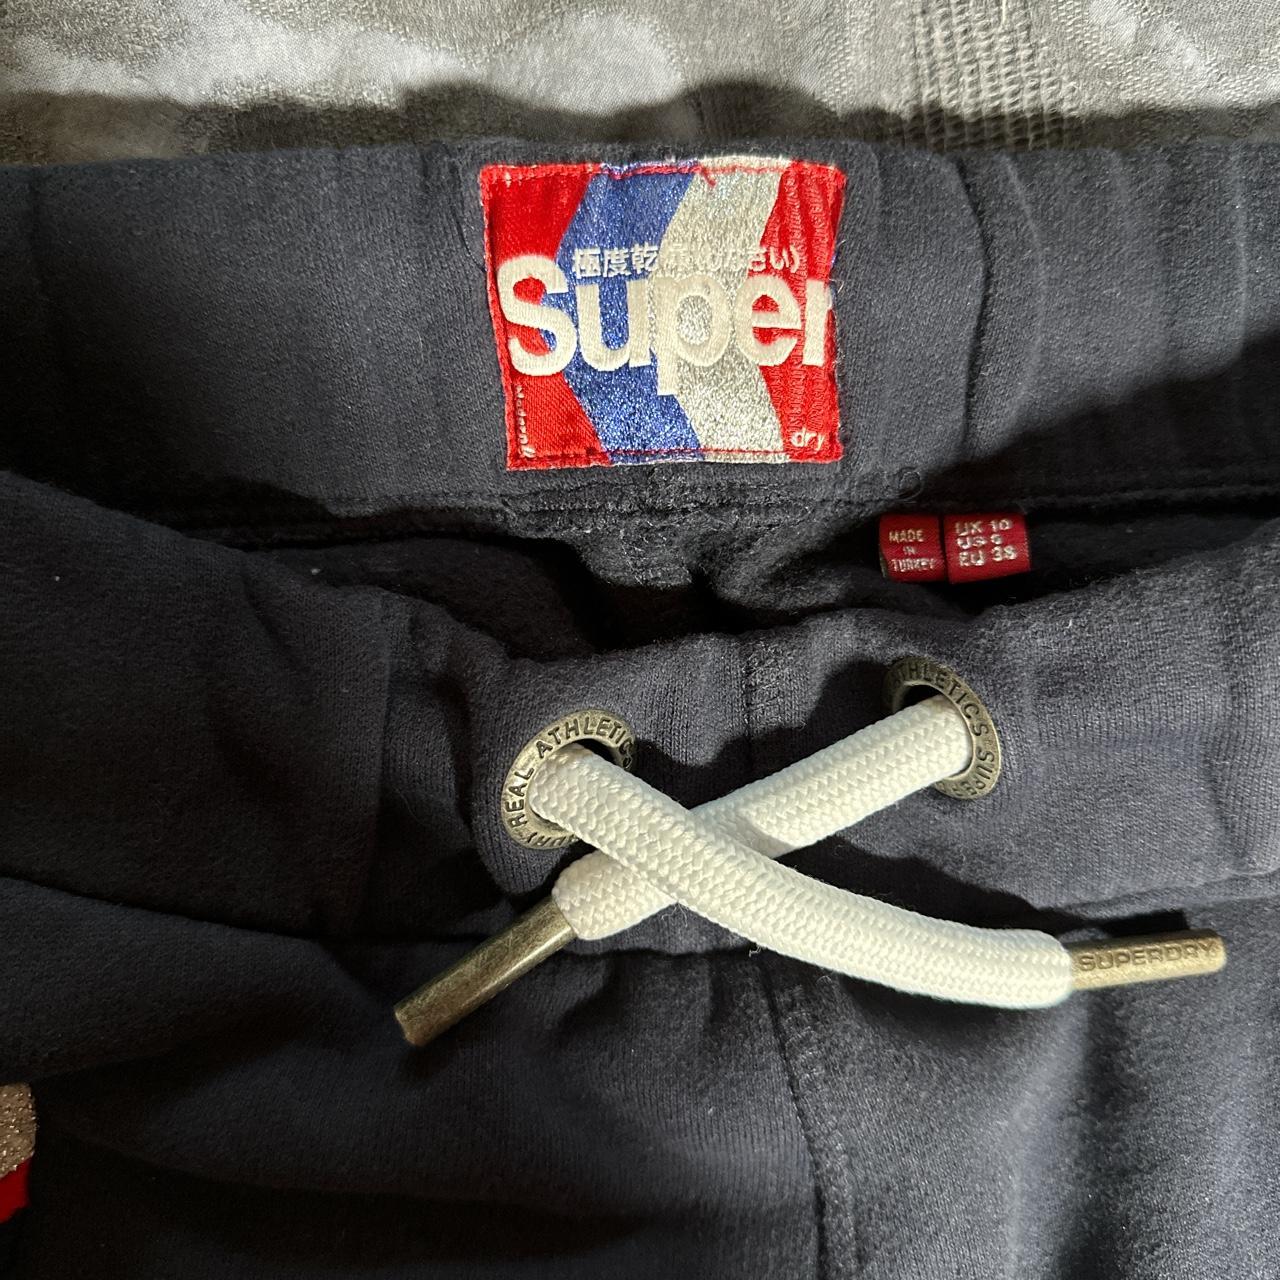 Superdry Women's Navy and Red Joggers-tracksuits (2)